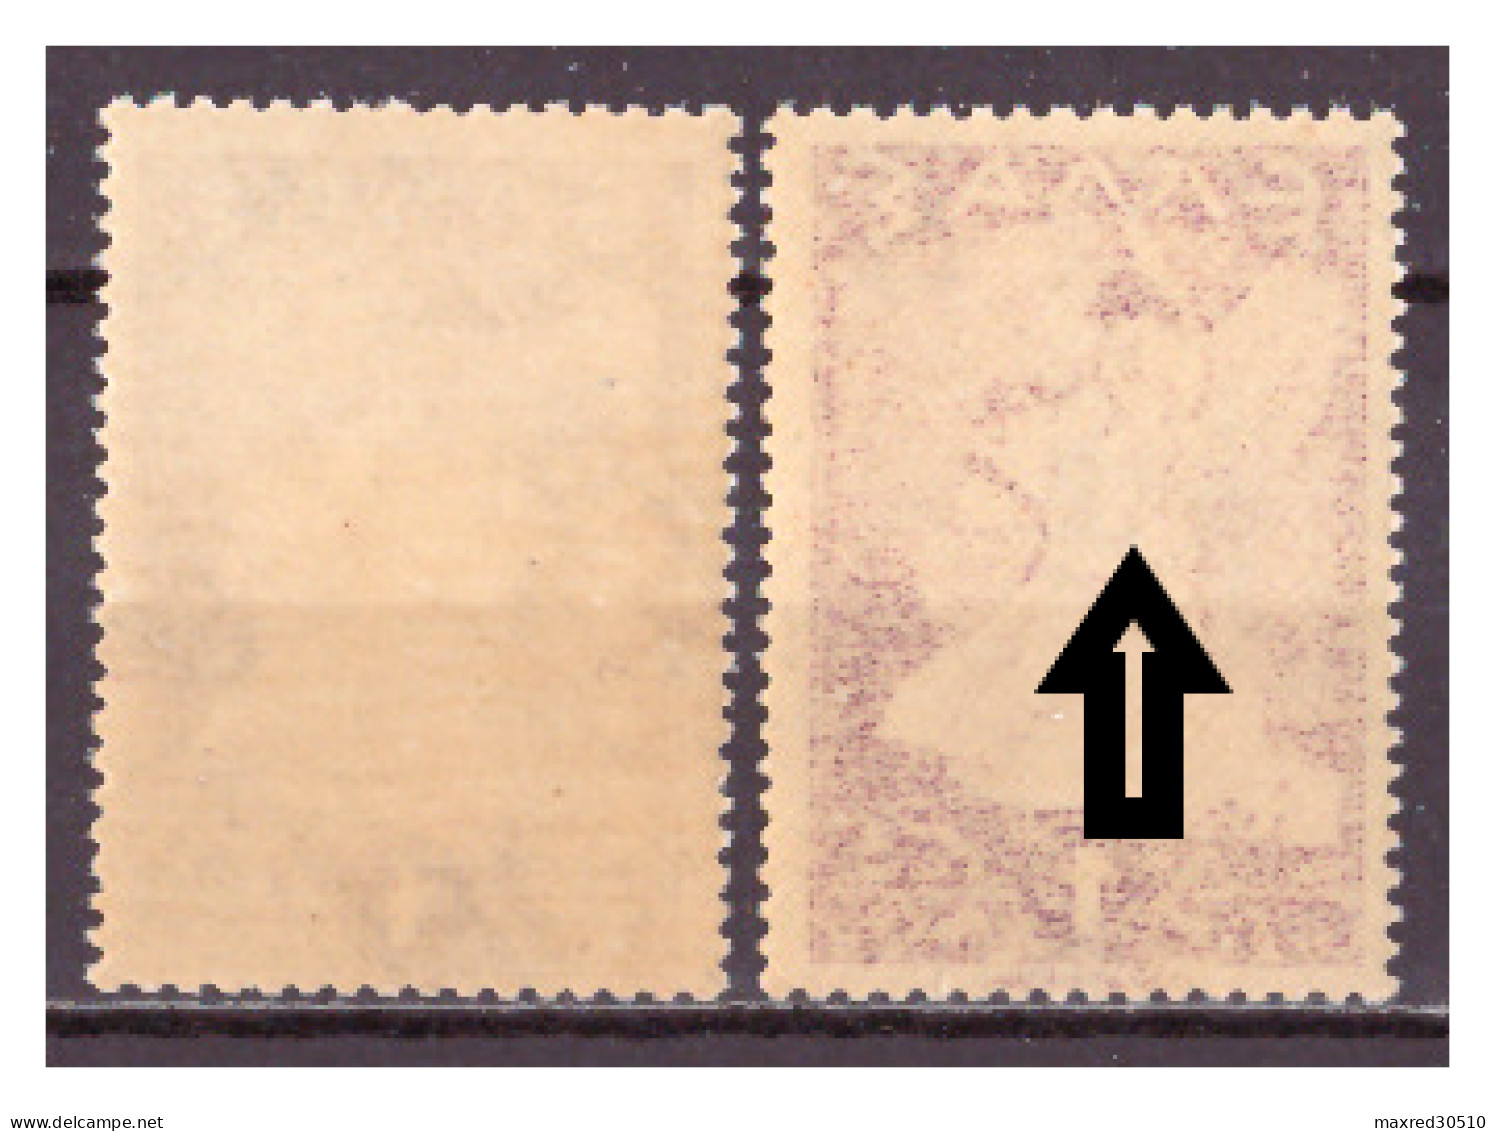 GREECE 1945 2X1L. OF THE "GLORY ISSUE" THE 2ND ONE (SEE ARROWS) WITH MIRROR PRINTING AT THE GUM ERROR MNH - Plaatfouten En Curiosa